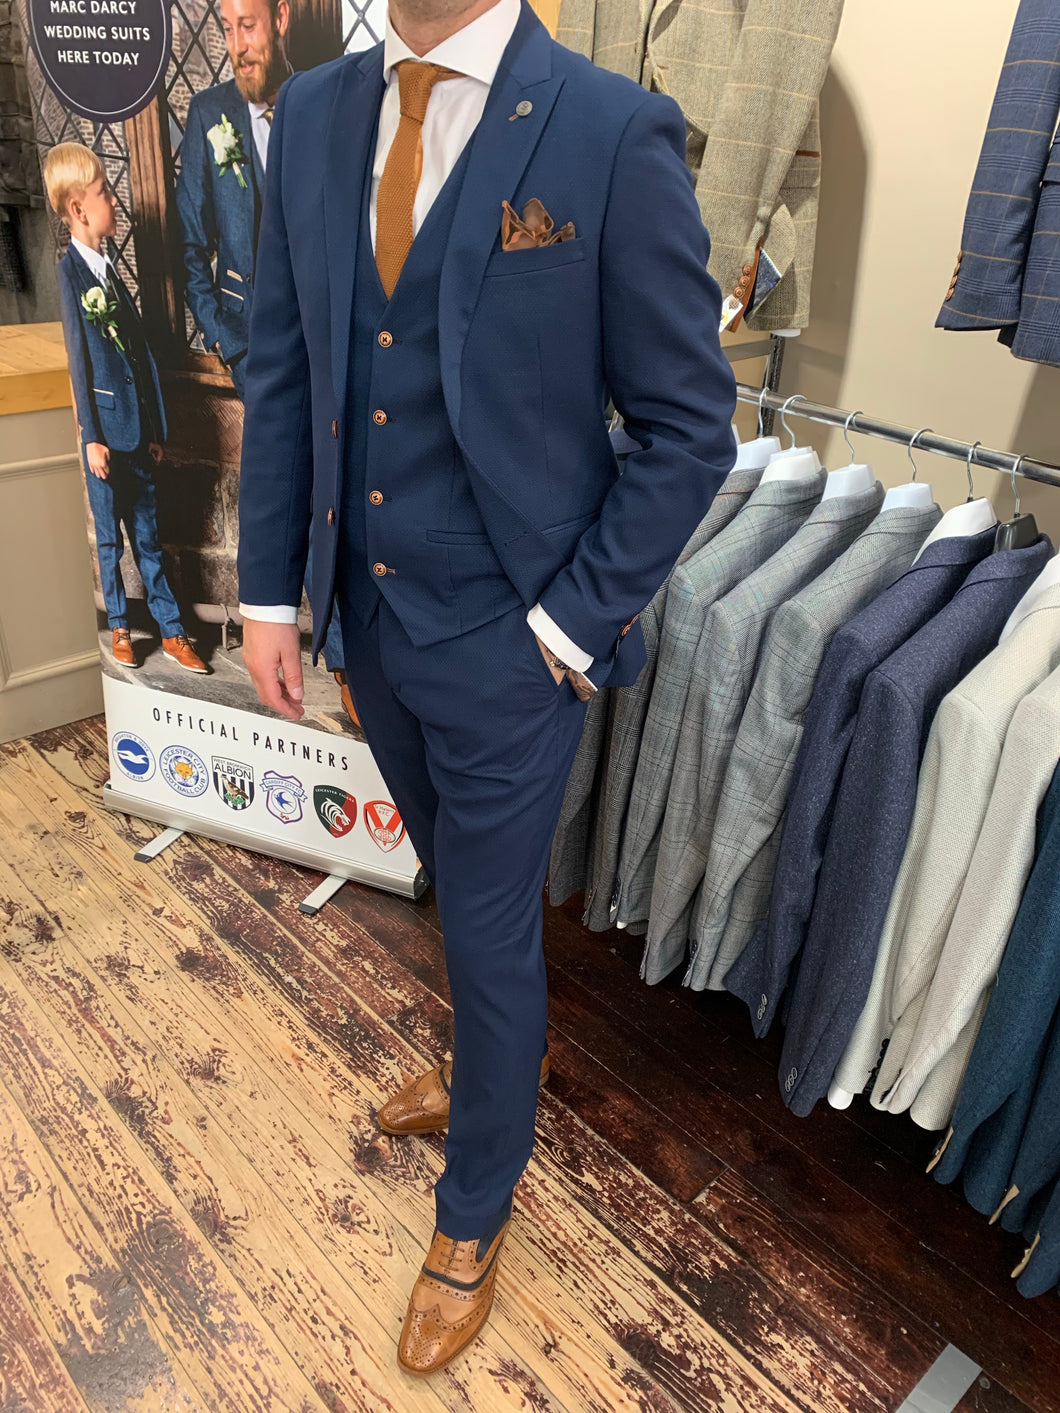 arc Darcy ‘Max Royal’ blue three piece suit (waistcoat, jacket and trousers sold separately) from Gere Menswear